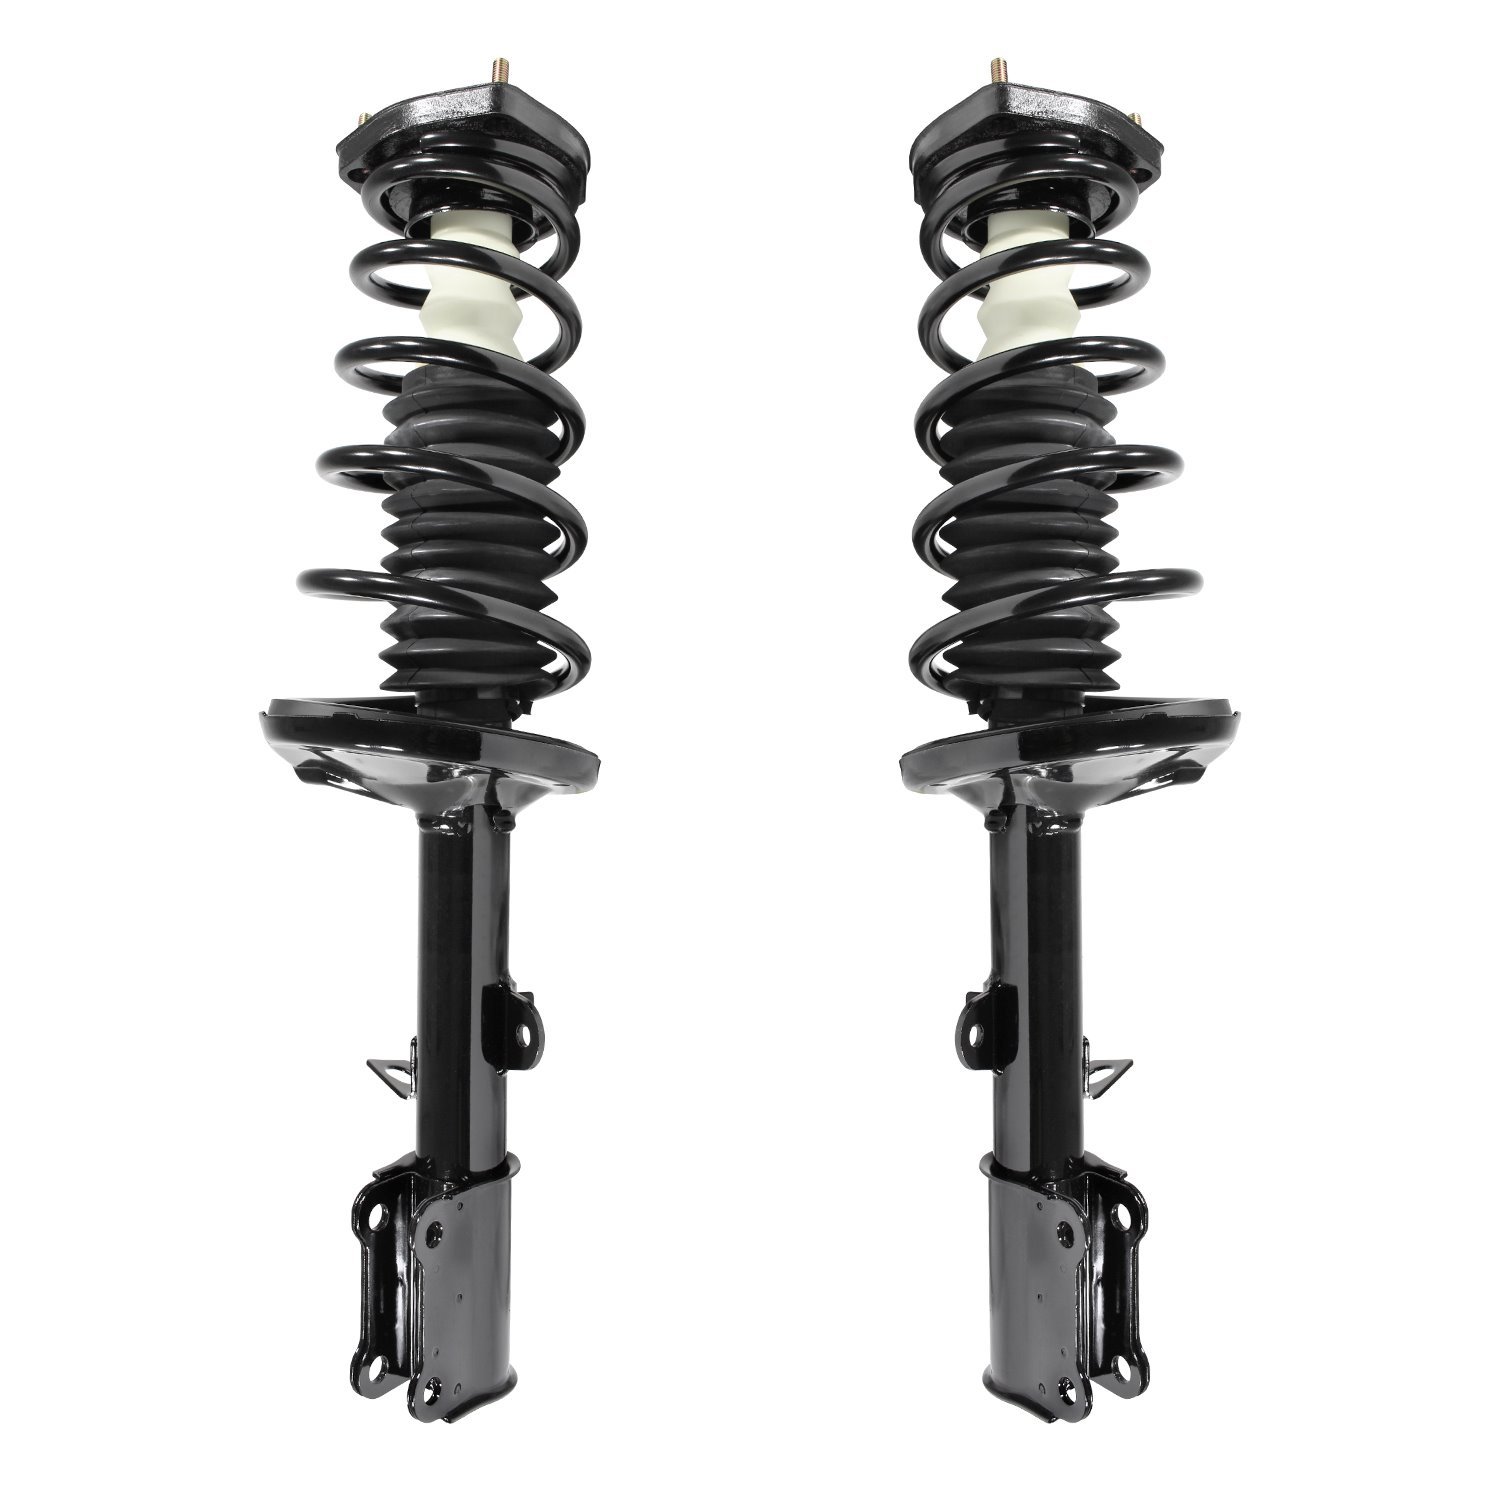 2-15051-15052-001 Suspension Strut & Coil Spring Assembly Set Fits Select Chevy Prizm, Geo Prizm, Toyota Corolla